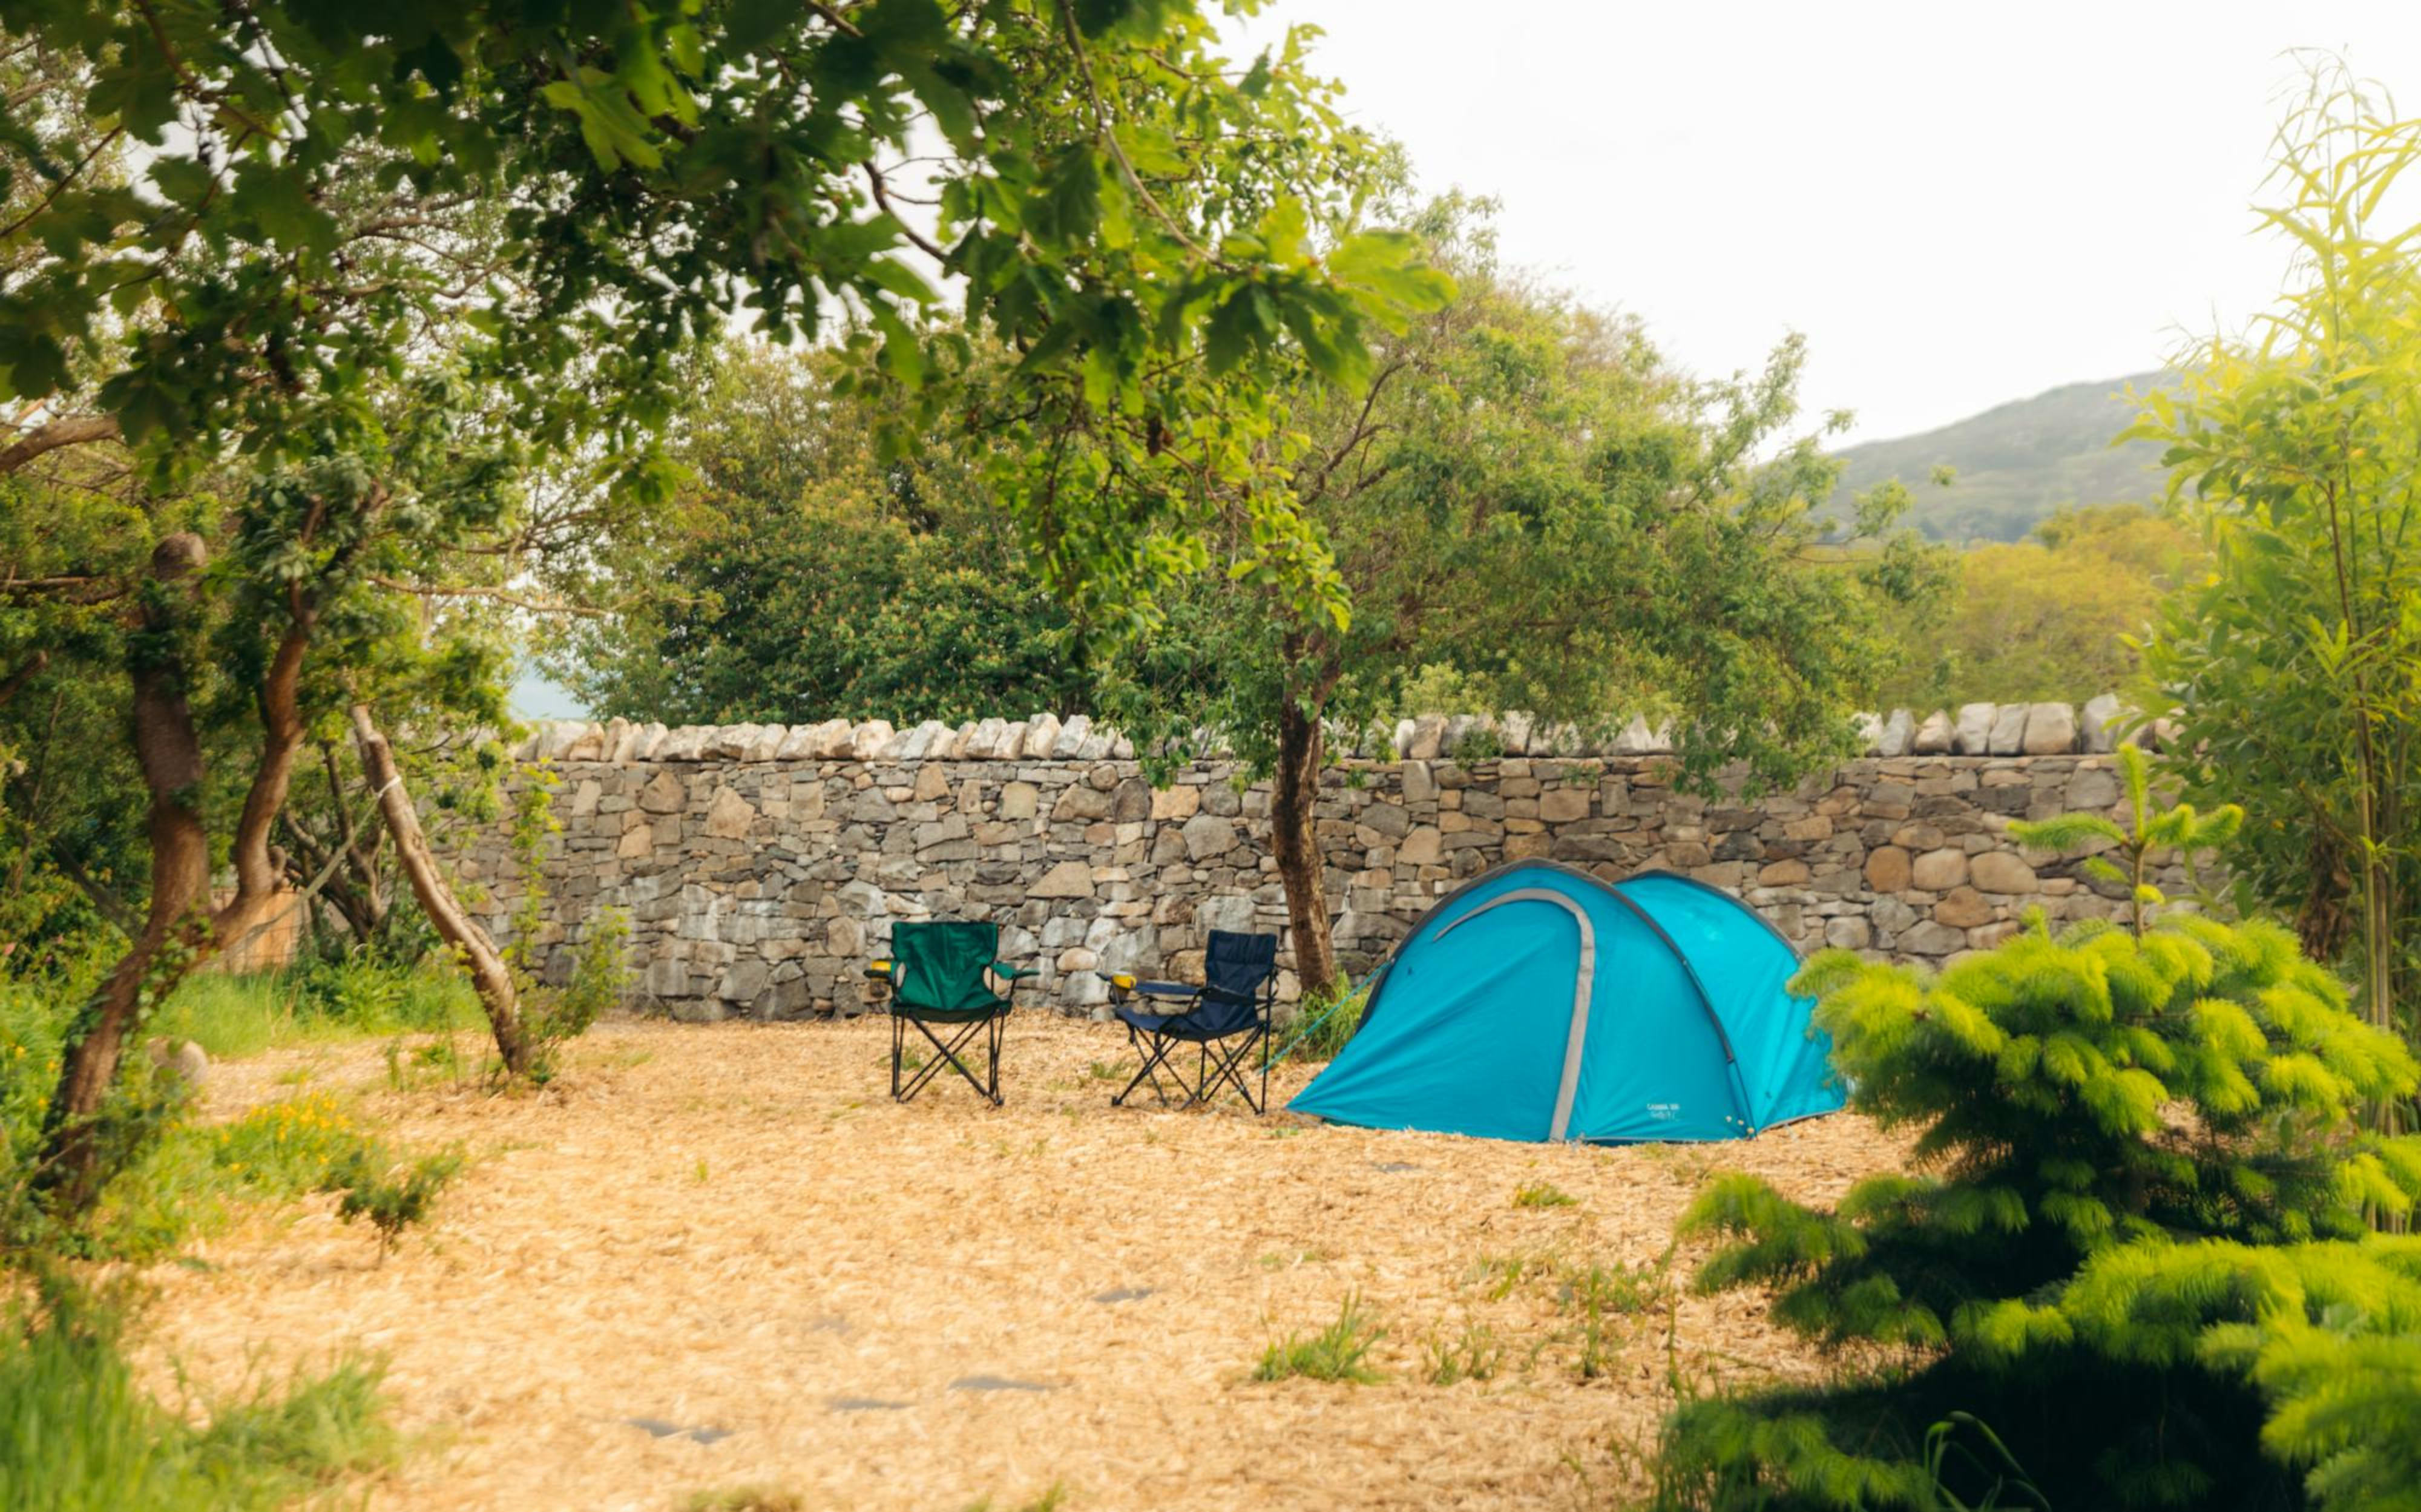 Tent by a drystone wall